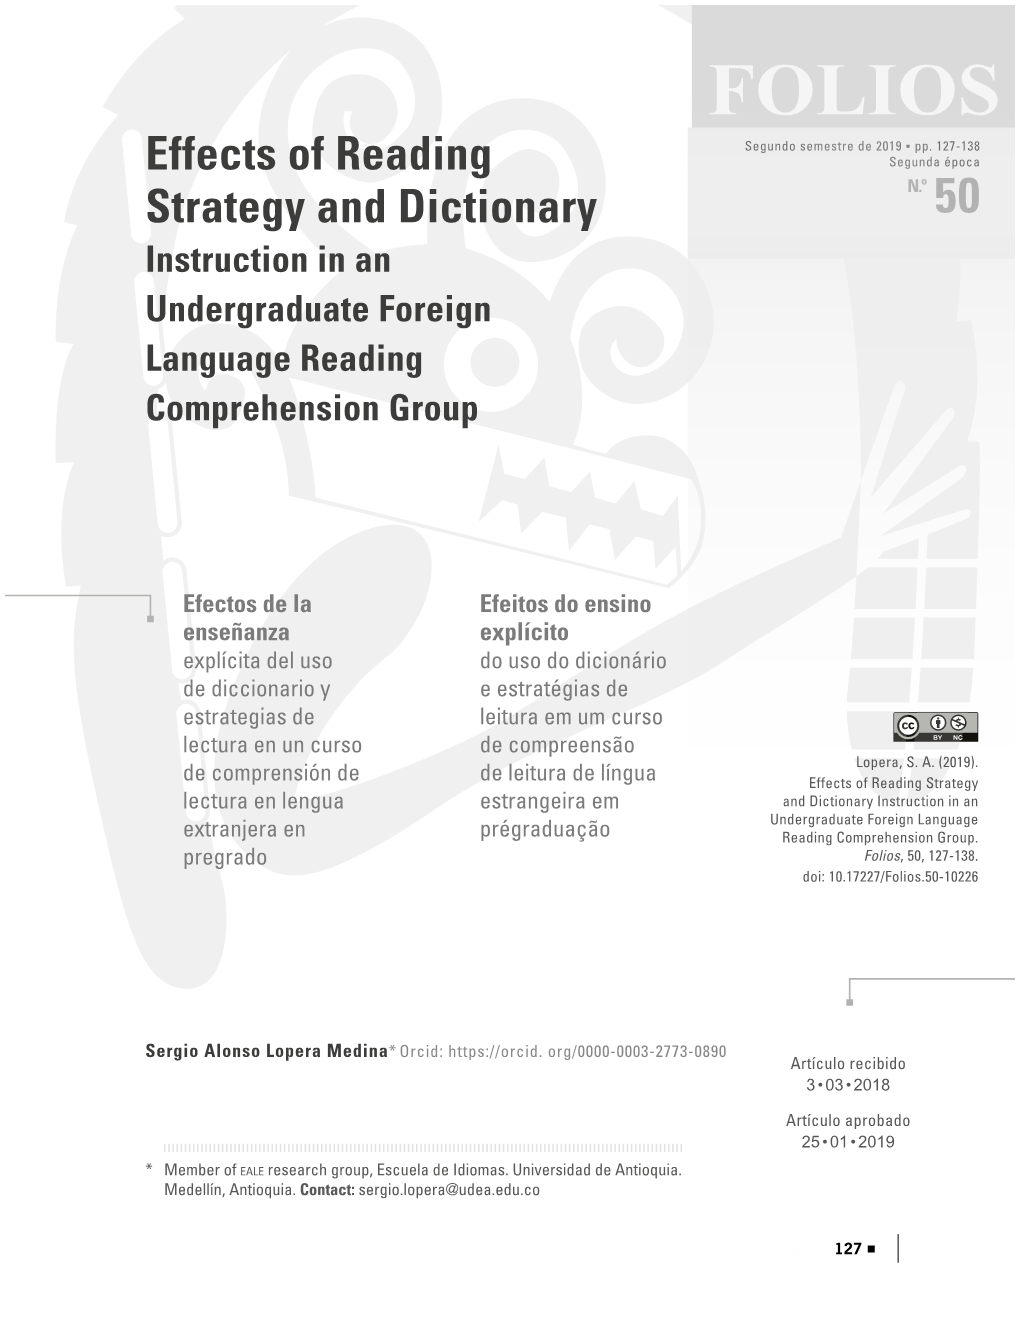 Effects of Reading Strategy and Dictionary Instruction in an Undergraduate Foreign Language Reading Comprehension Group ﻿ / Sergio Alonso Lopera Medina